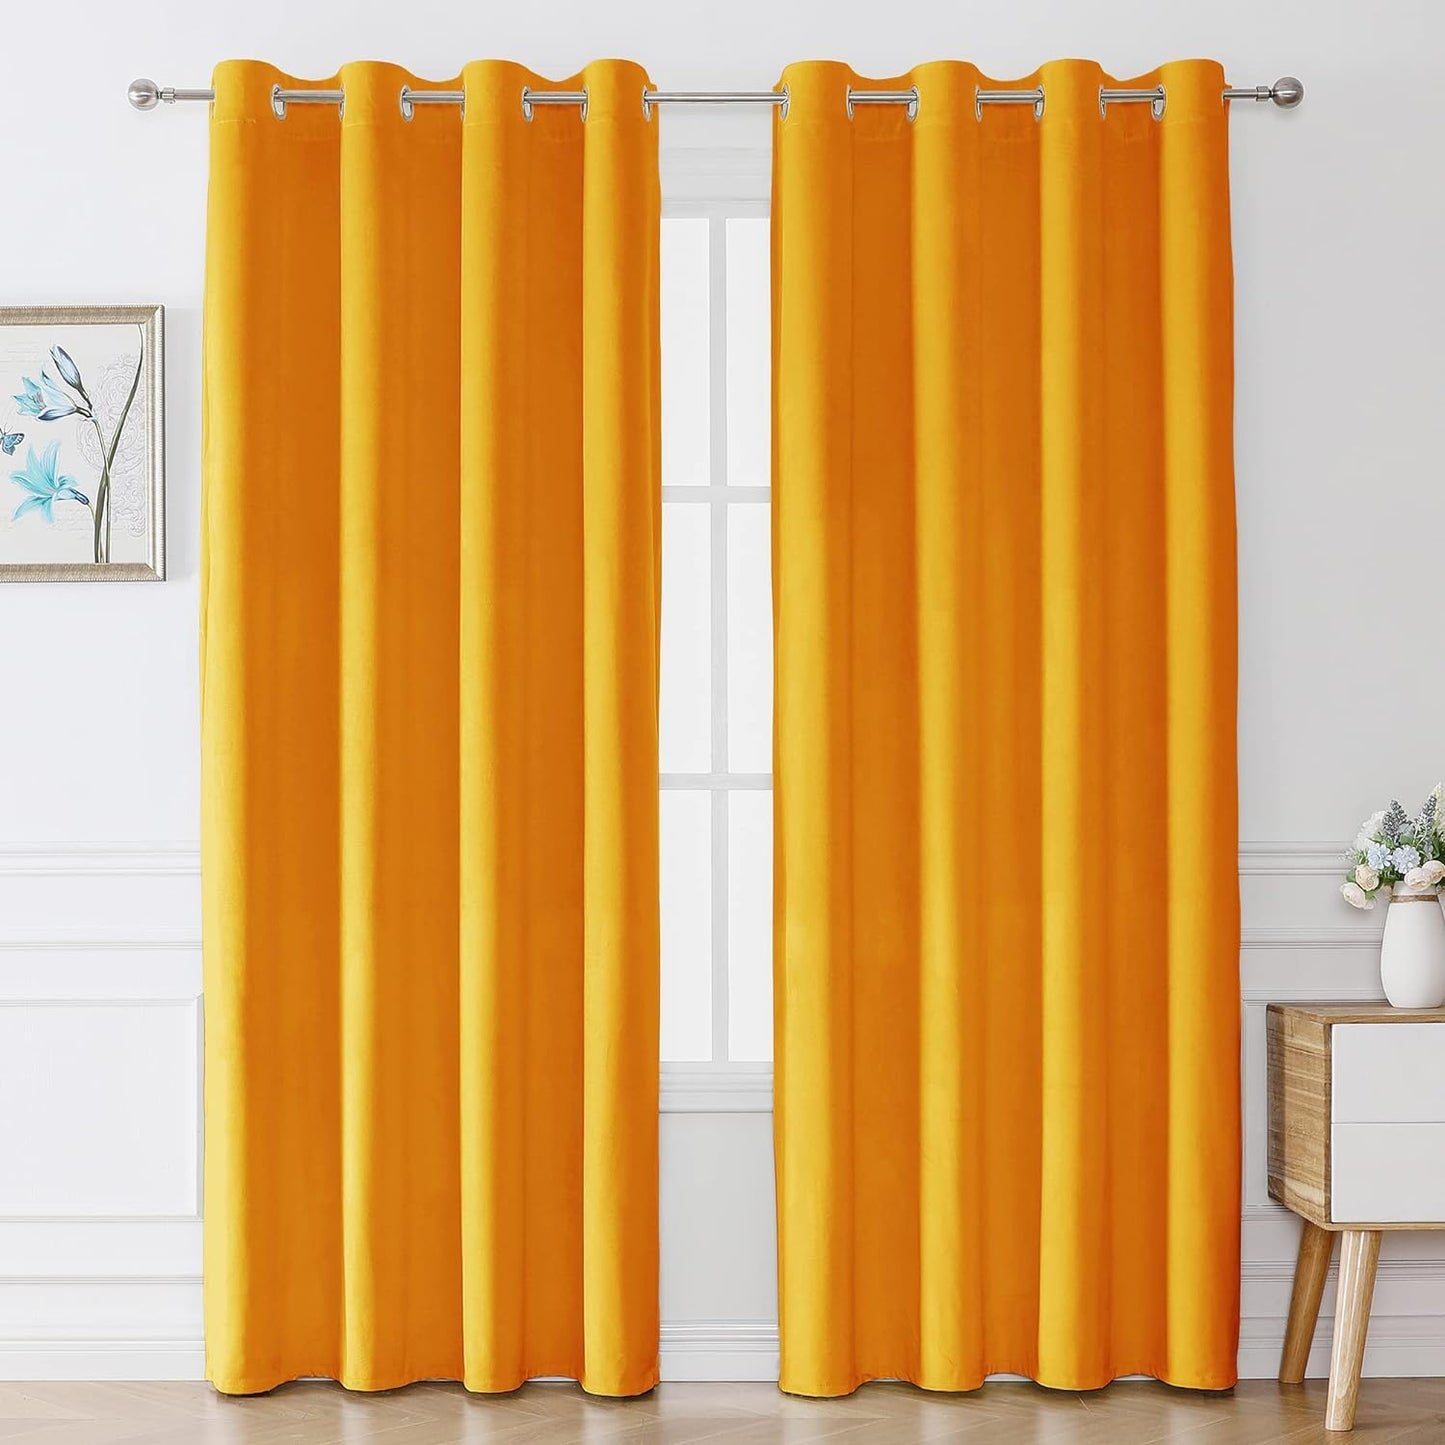 Victree Velvet Curtains for Bedroom, Blackout Curtains 52 X 84 Inch Length - Room Darkening Sun Light Blocking Grommet Window Drapes for Living Room, 2 Panels, Navy  Victree Orange 52 X 96 Inches 